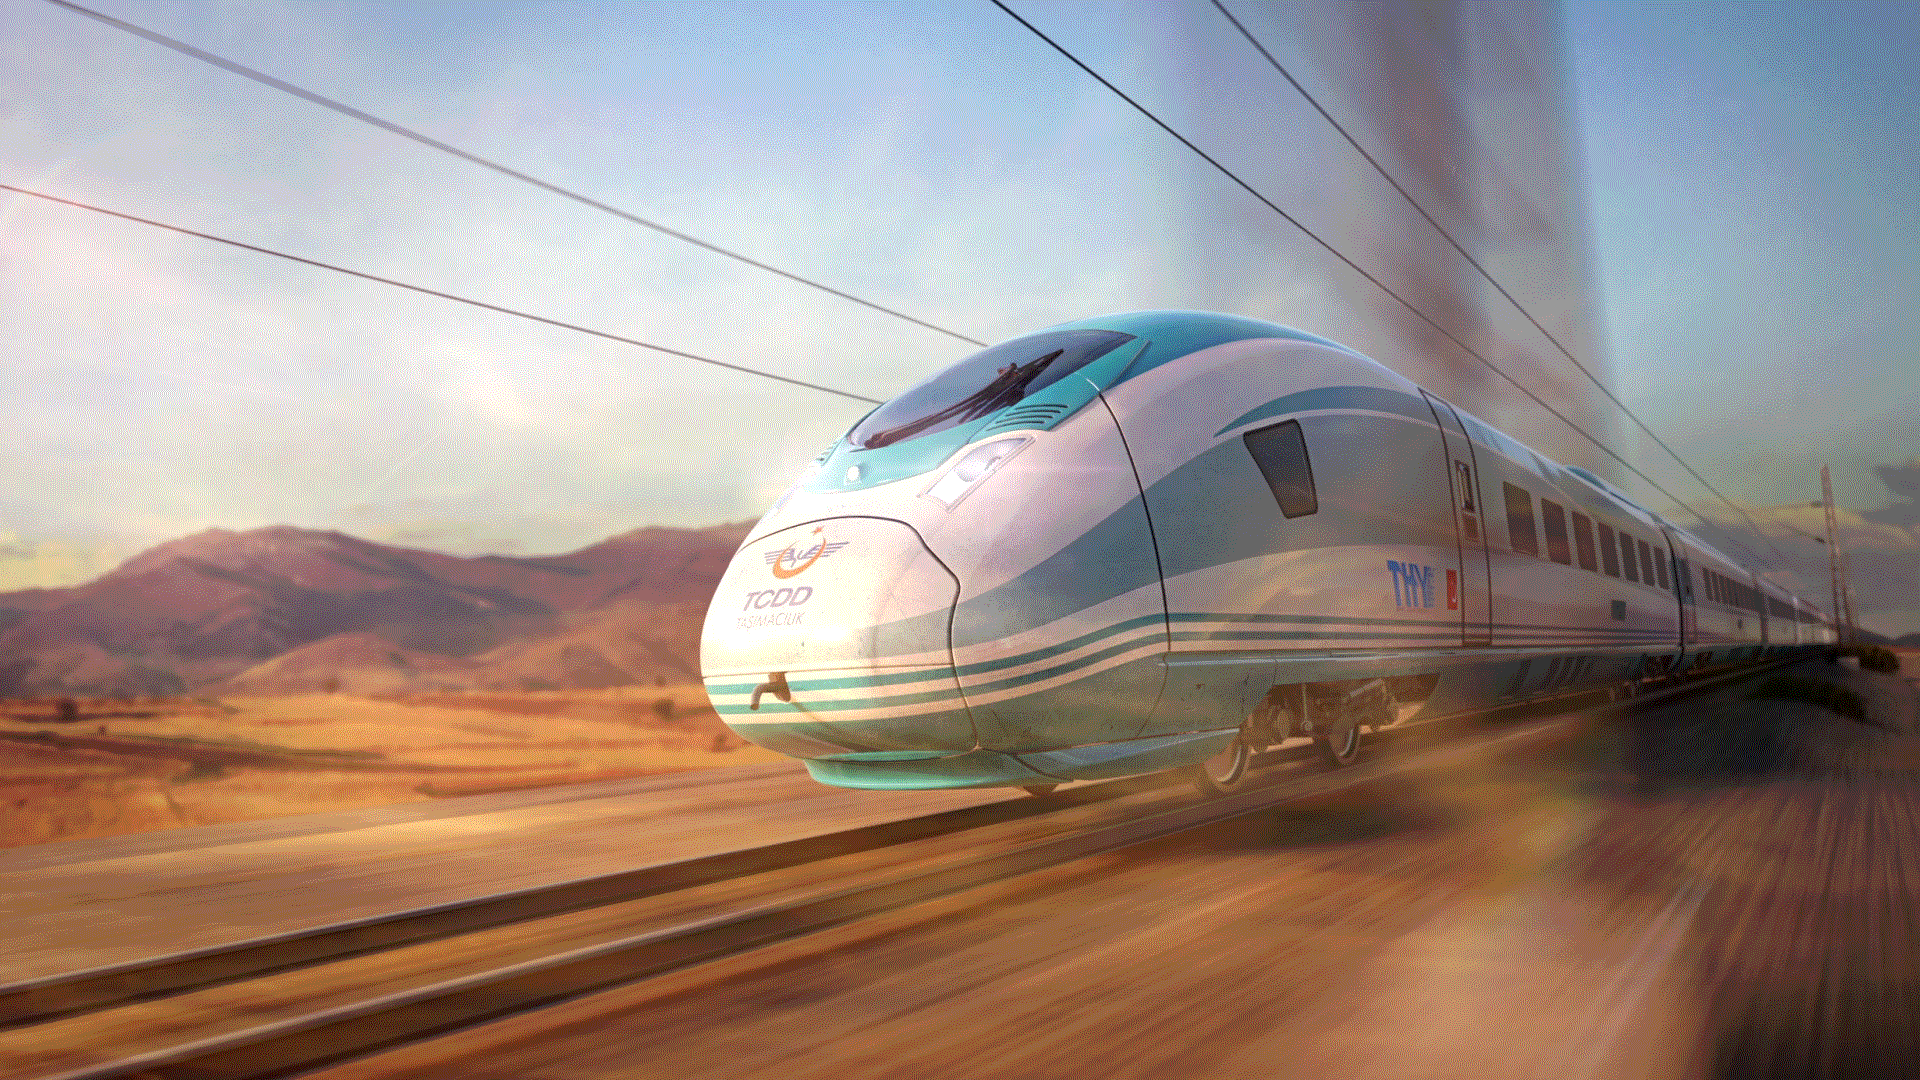 Image of the Velaro TR from Siemens Mobility in diagonal view and slight motion blur driving through a Turkish landscape.  